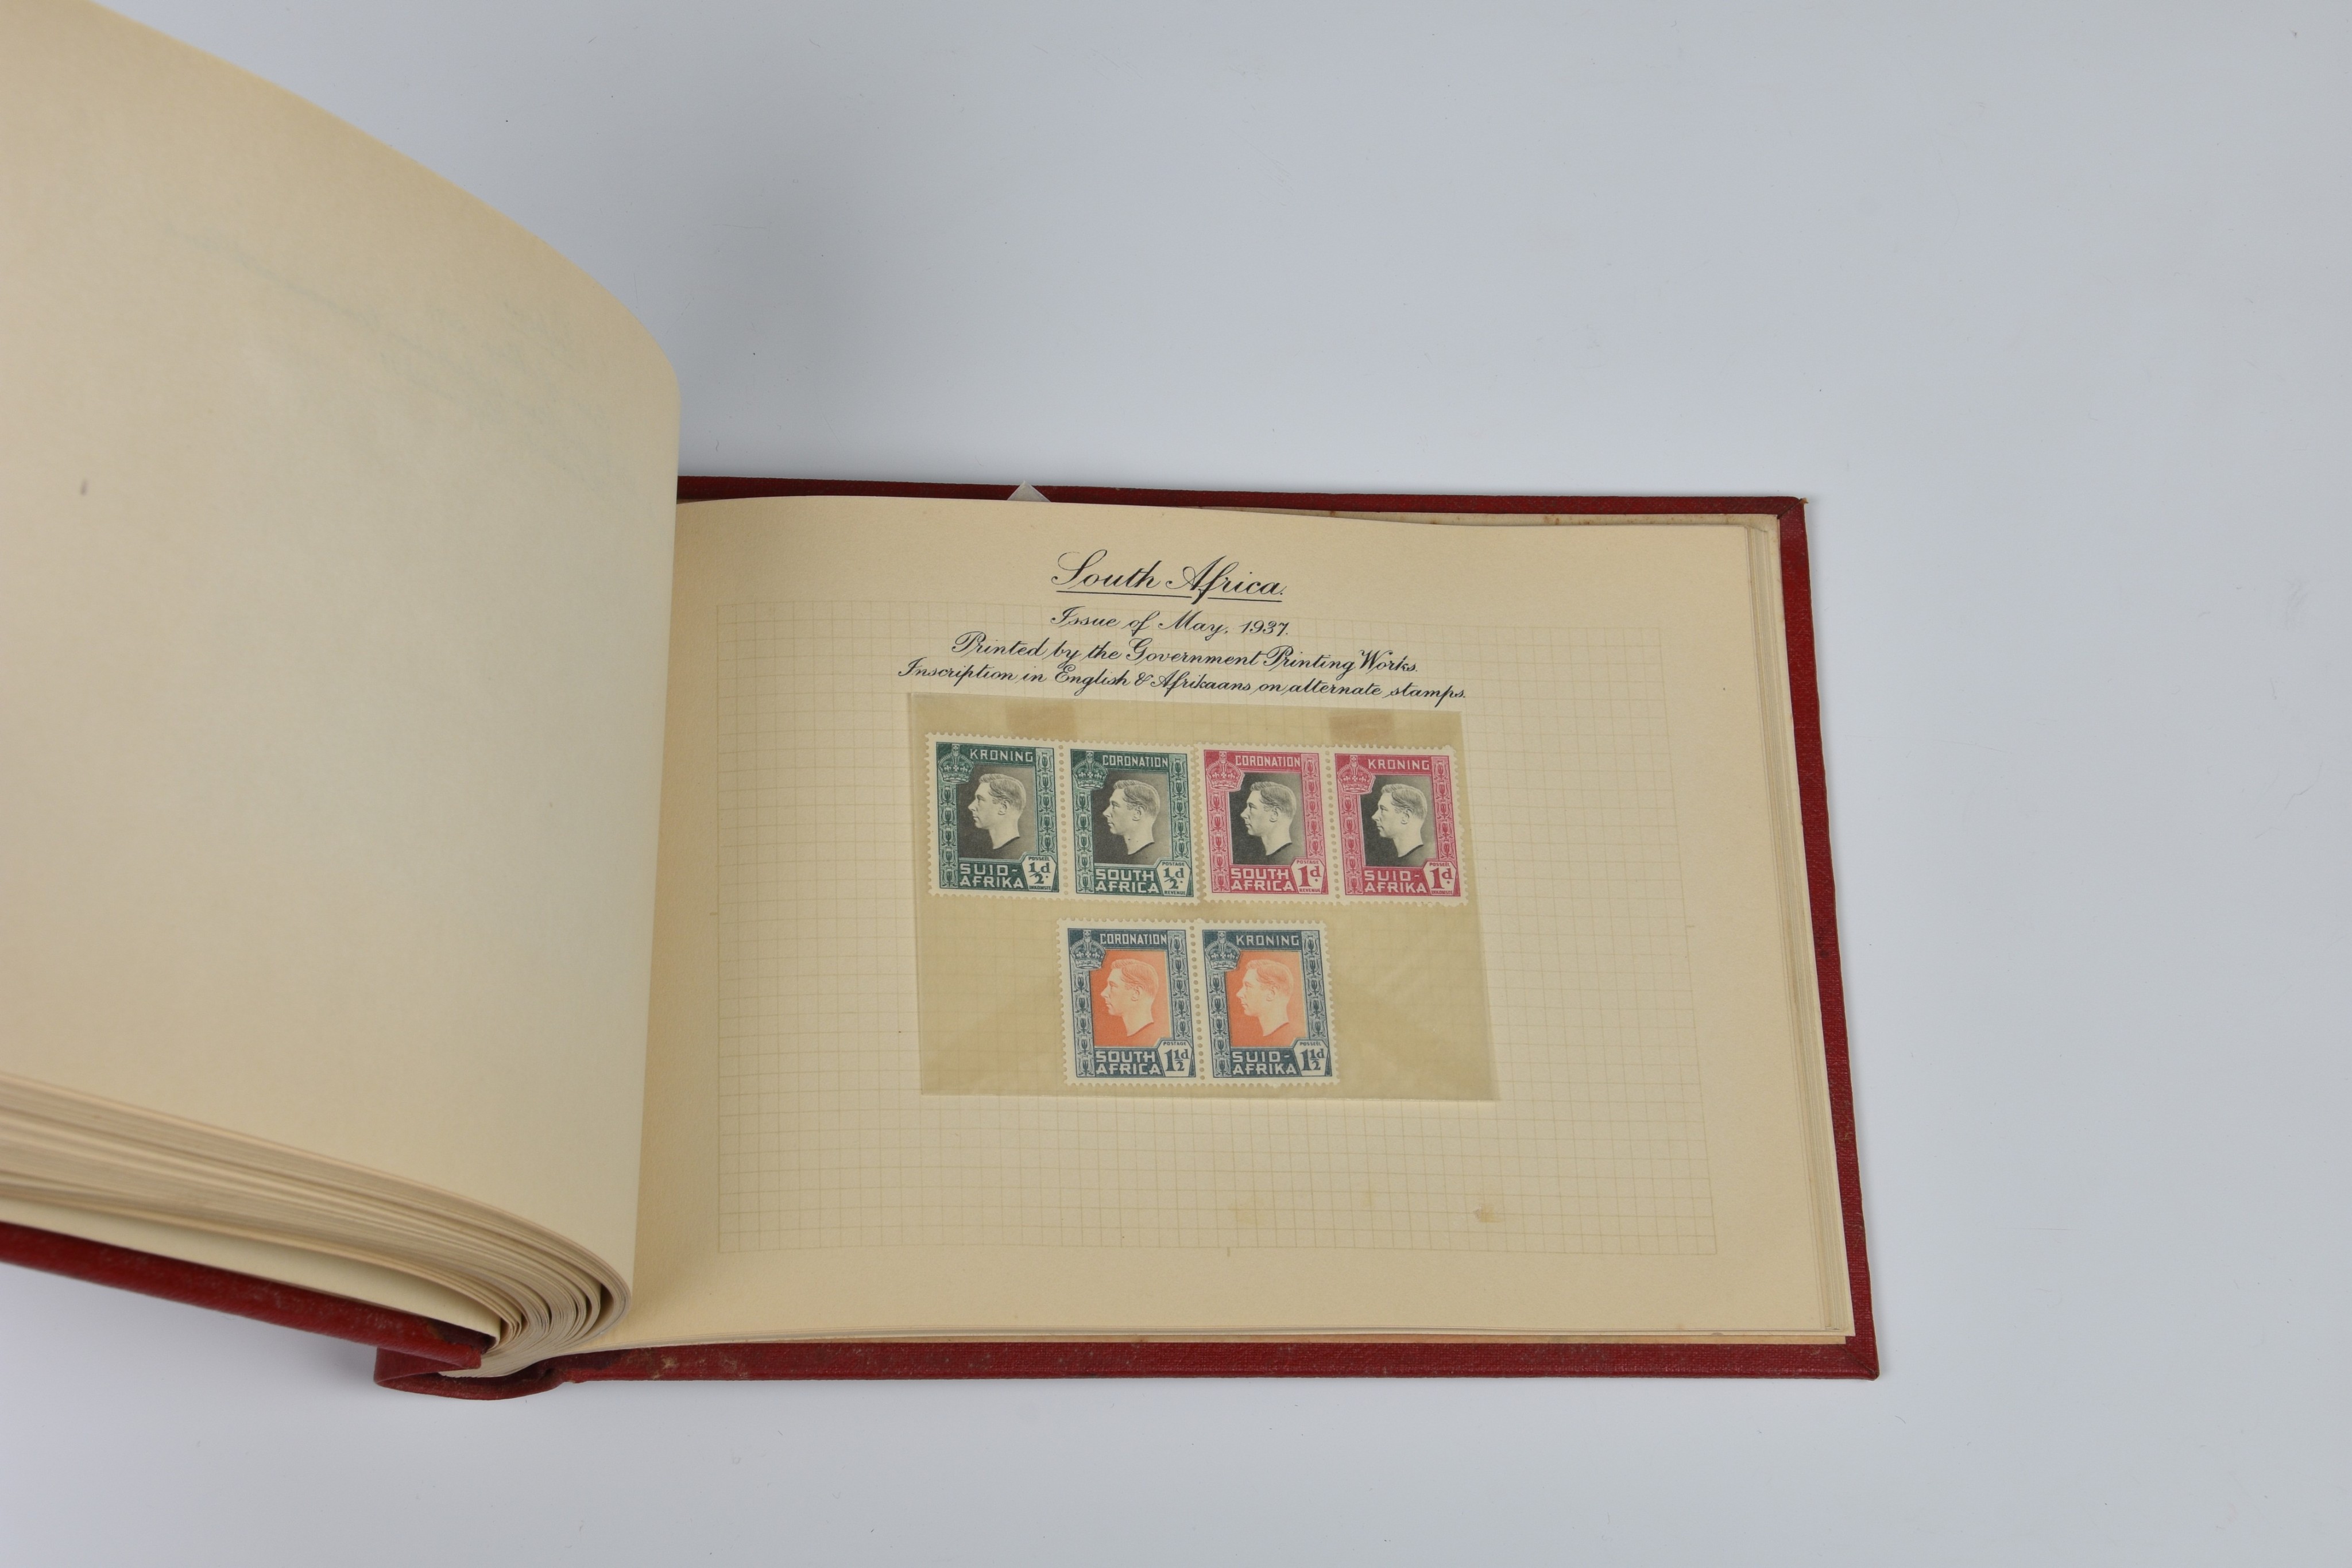 Philately interest - King George VI Coronation mint Commonwealth stamp collection, in 1937 F. G. - Image 5 of 5